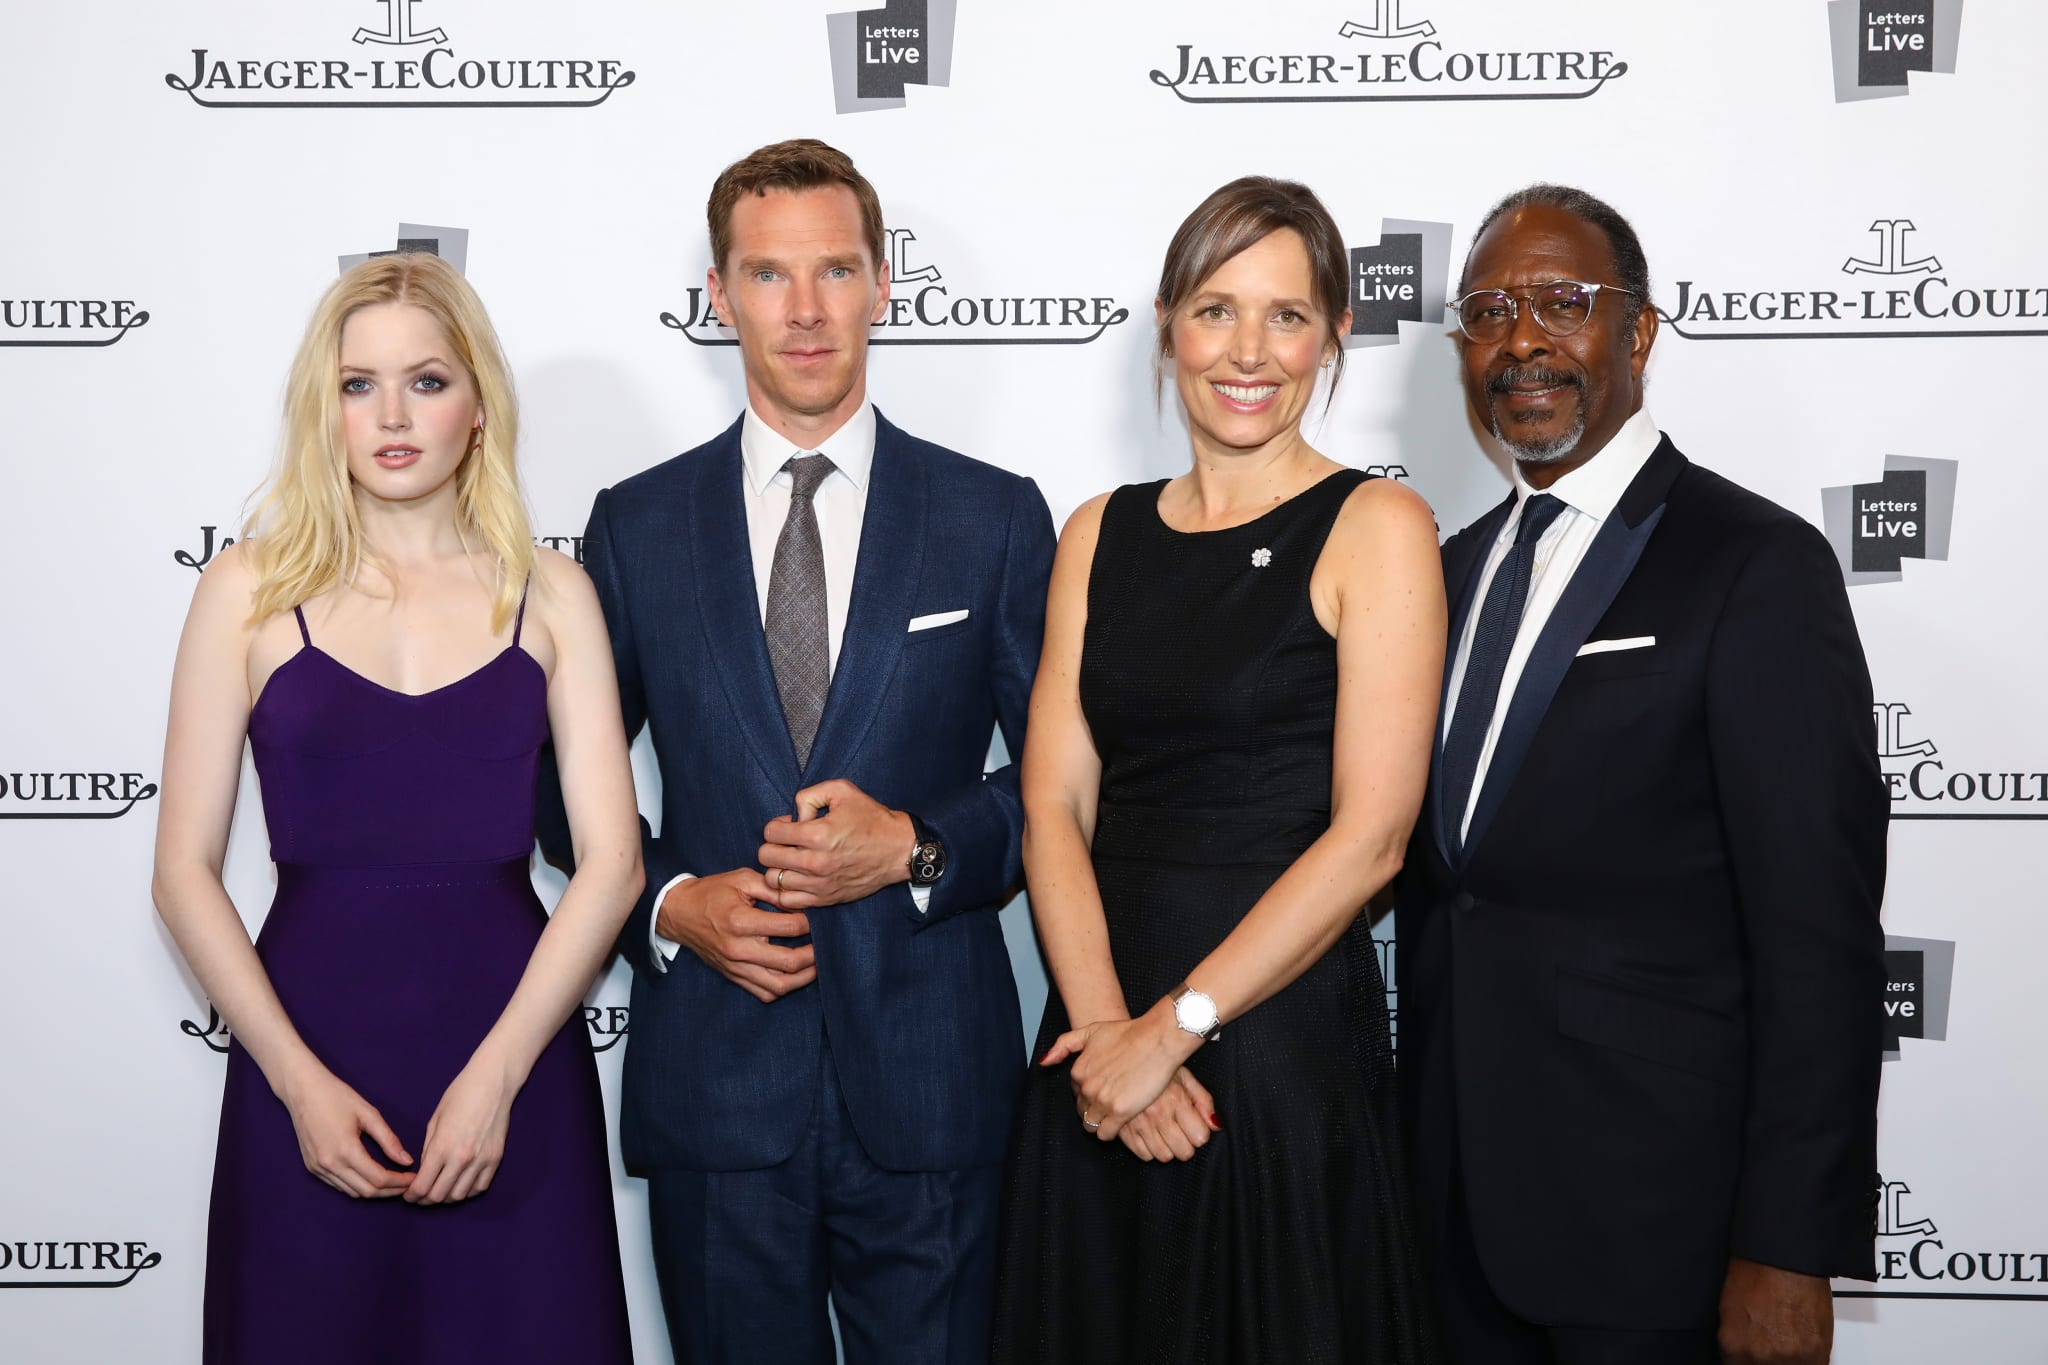 Ellie bamber benedict cumberbatch catherine rénier and clarke peters